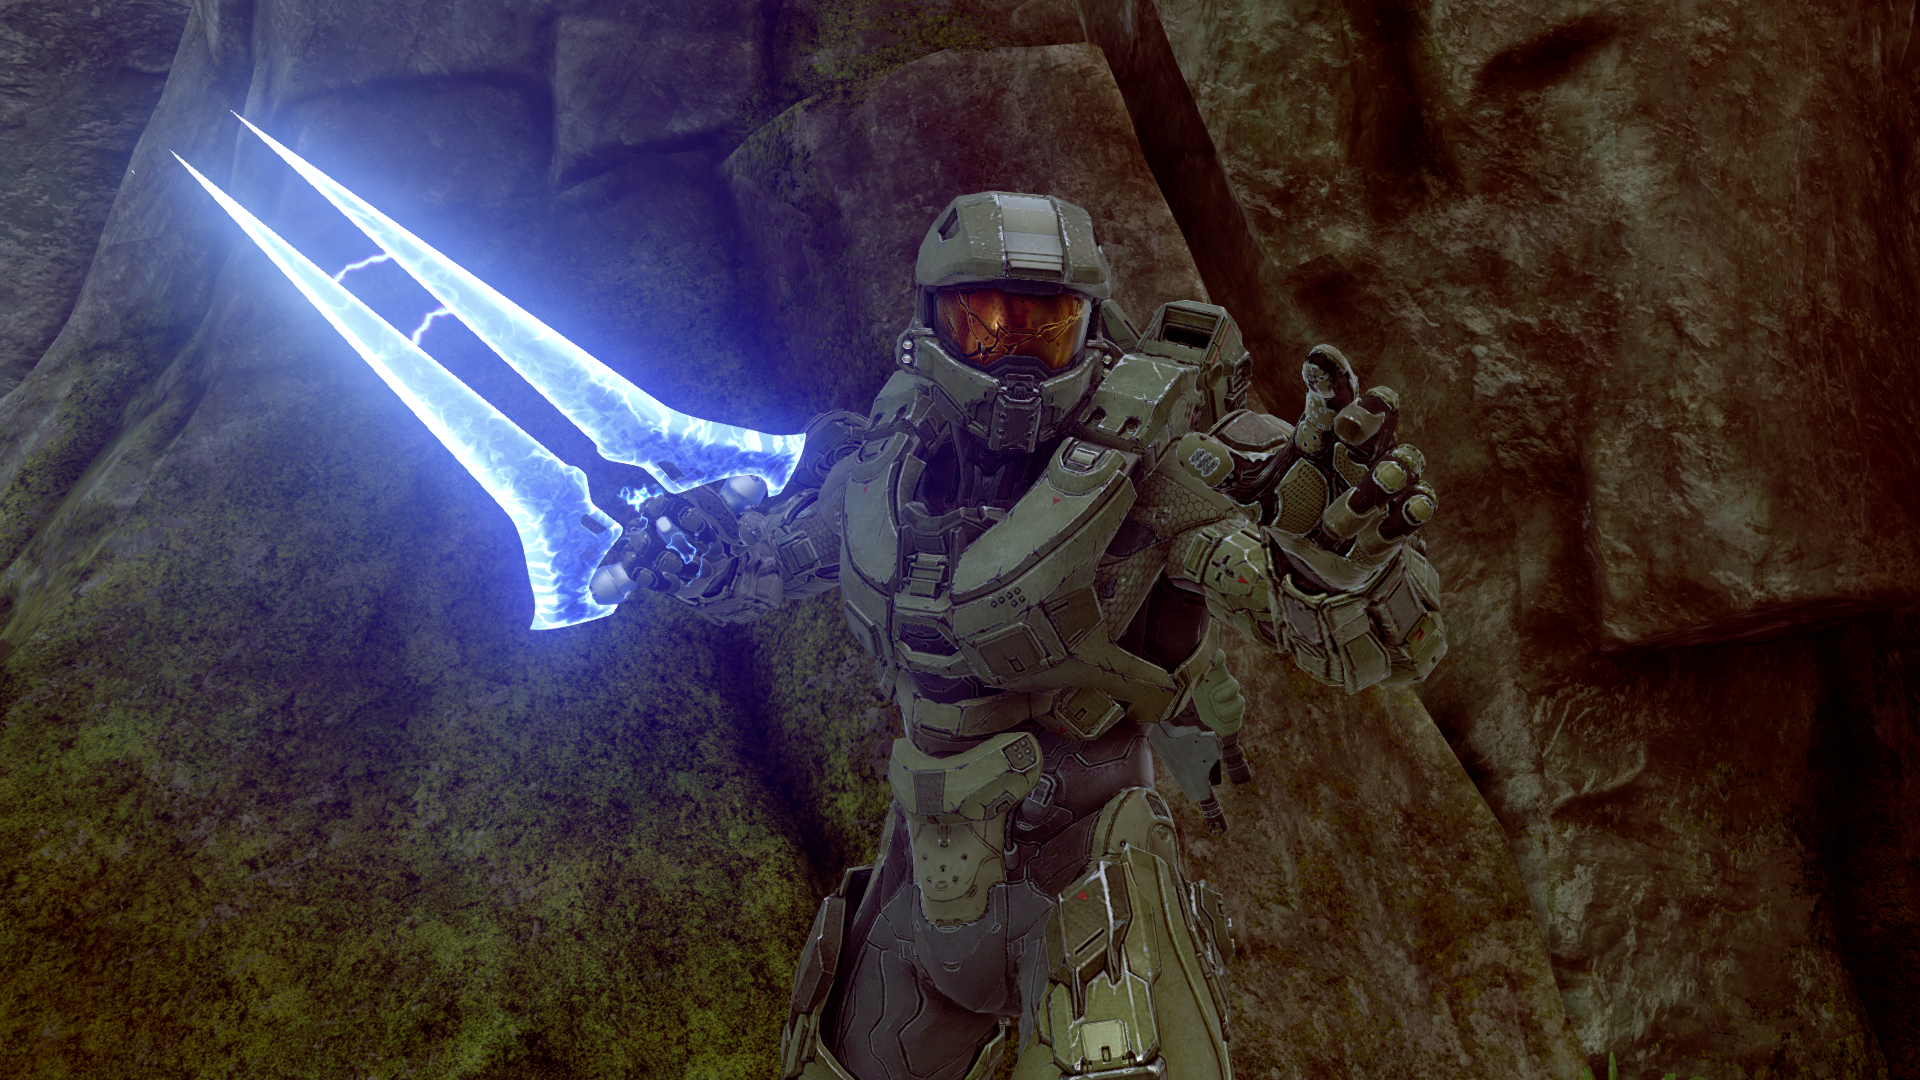 Halo 5 Master Chief With Energy Sword By Fred 104 Centurion On Deviantart.